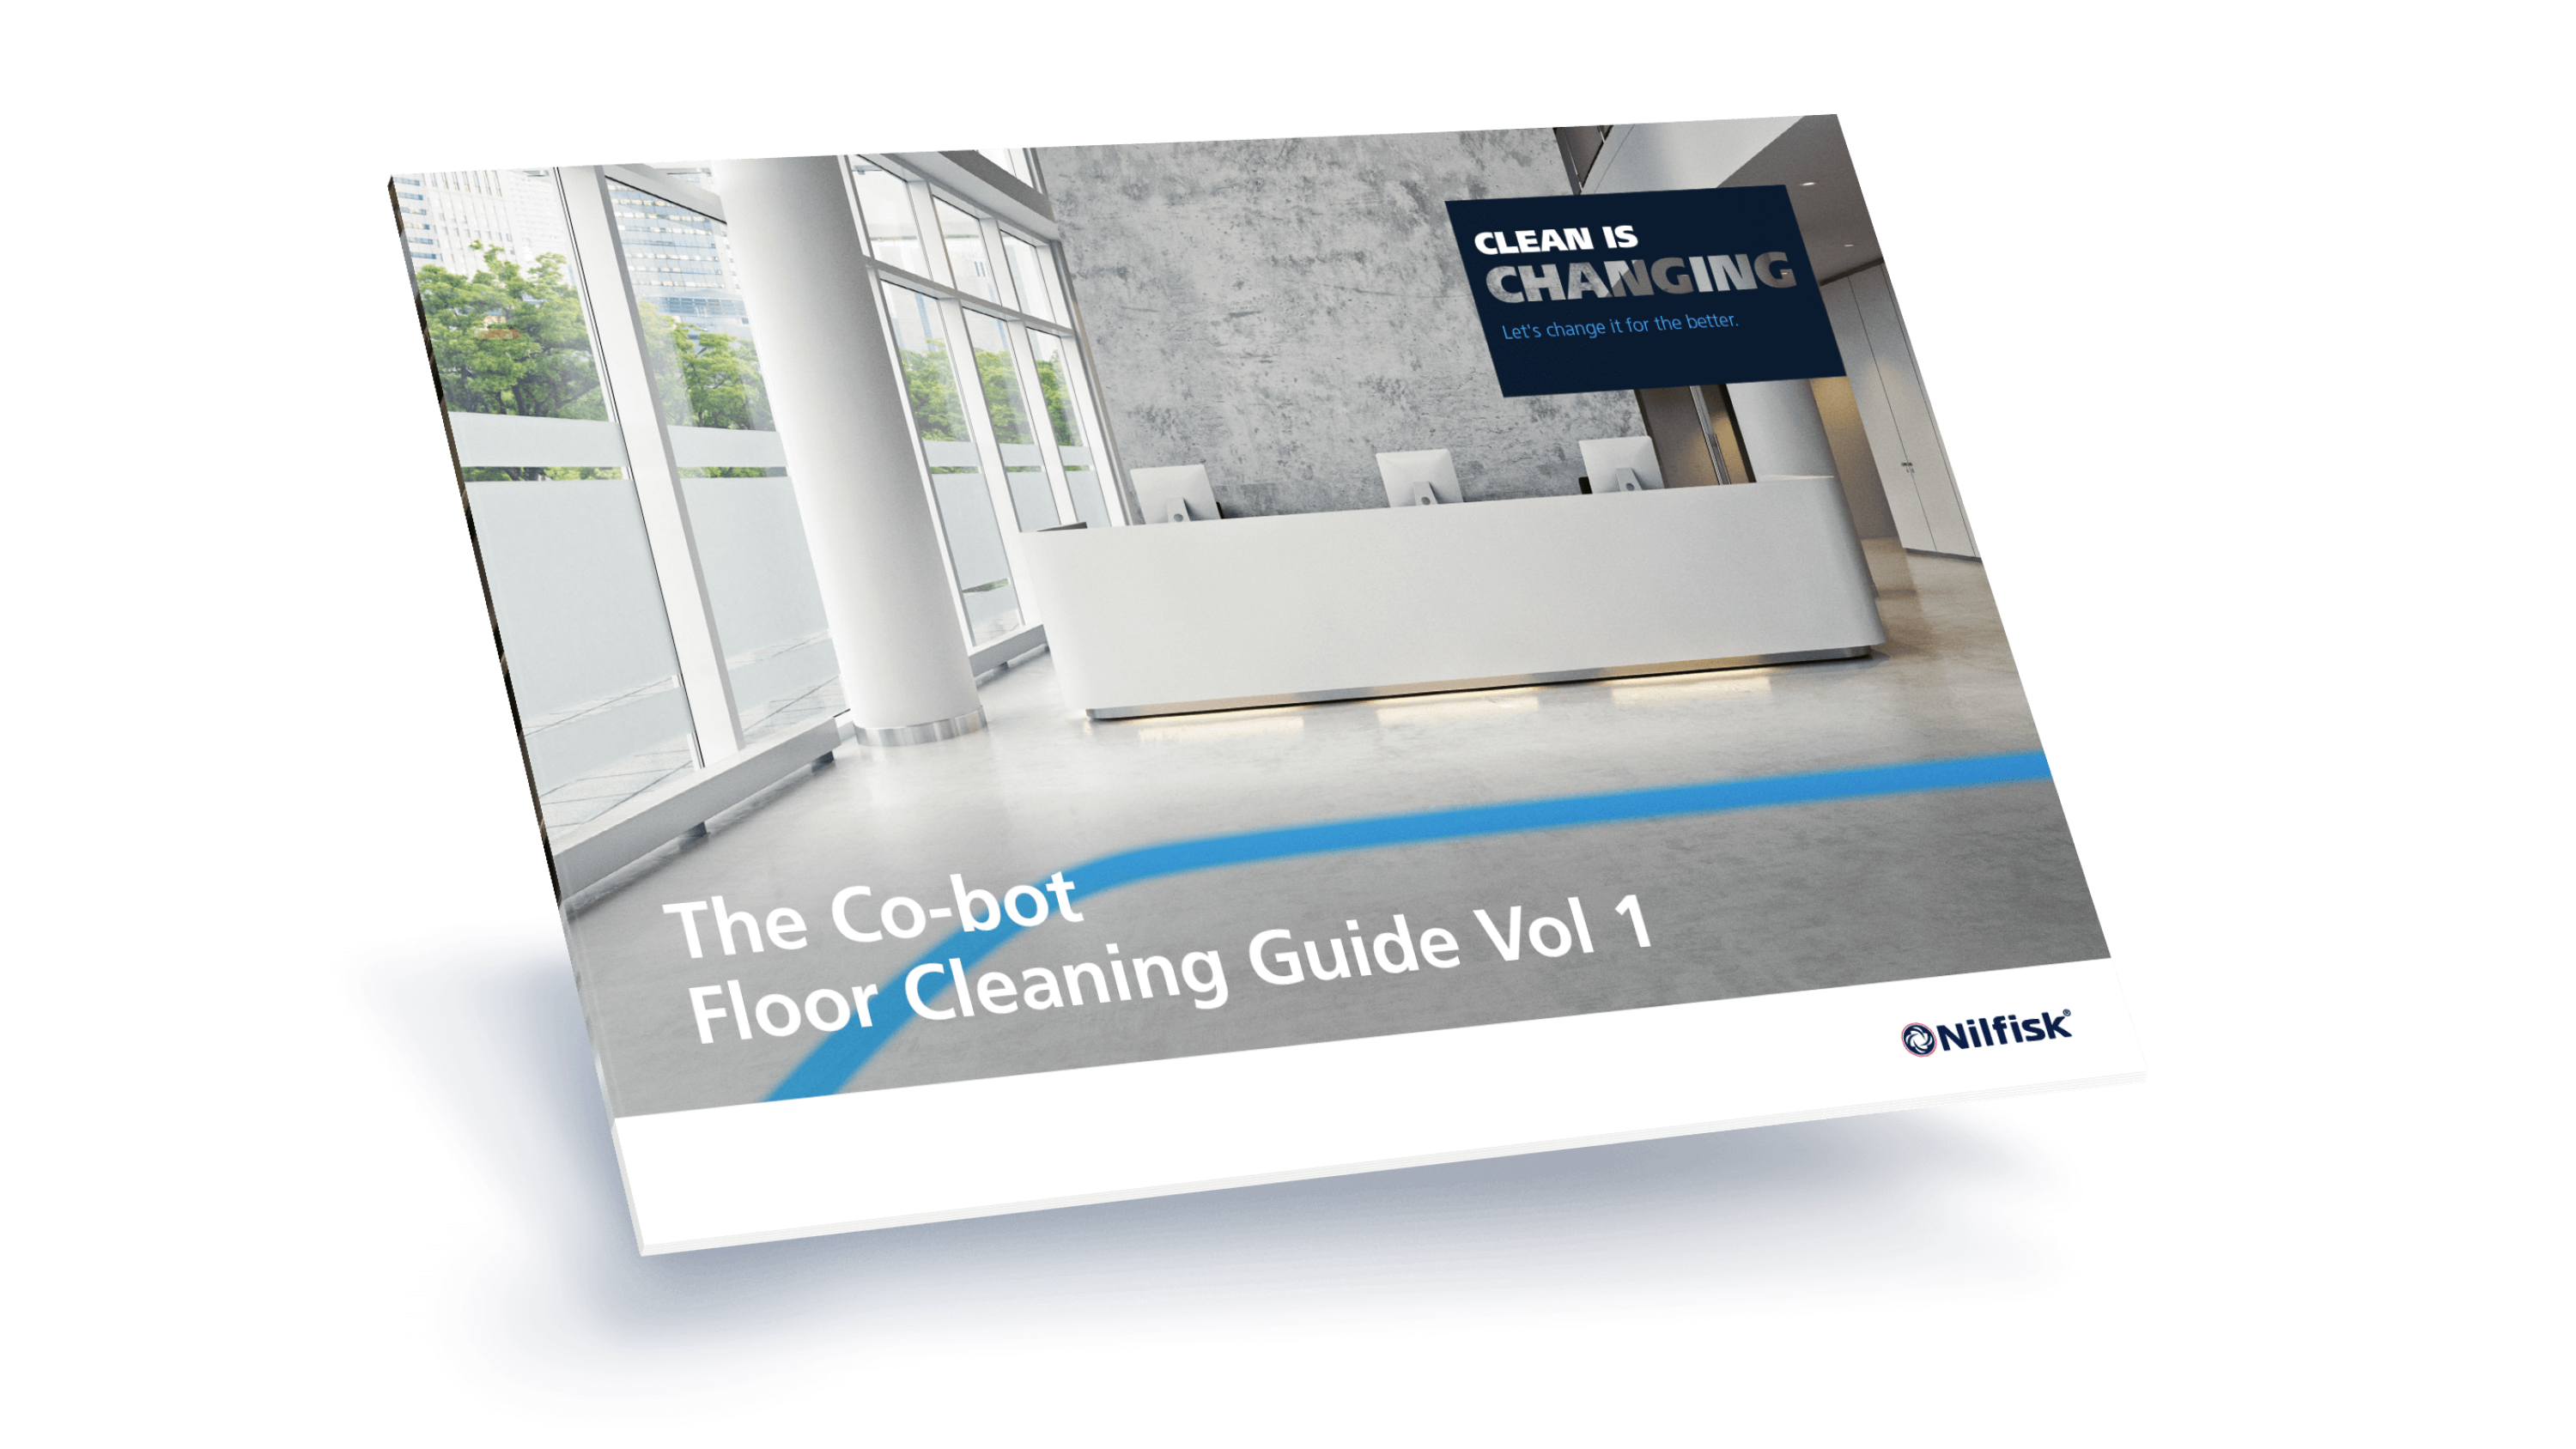 The Co-Bot floor cleaning guide